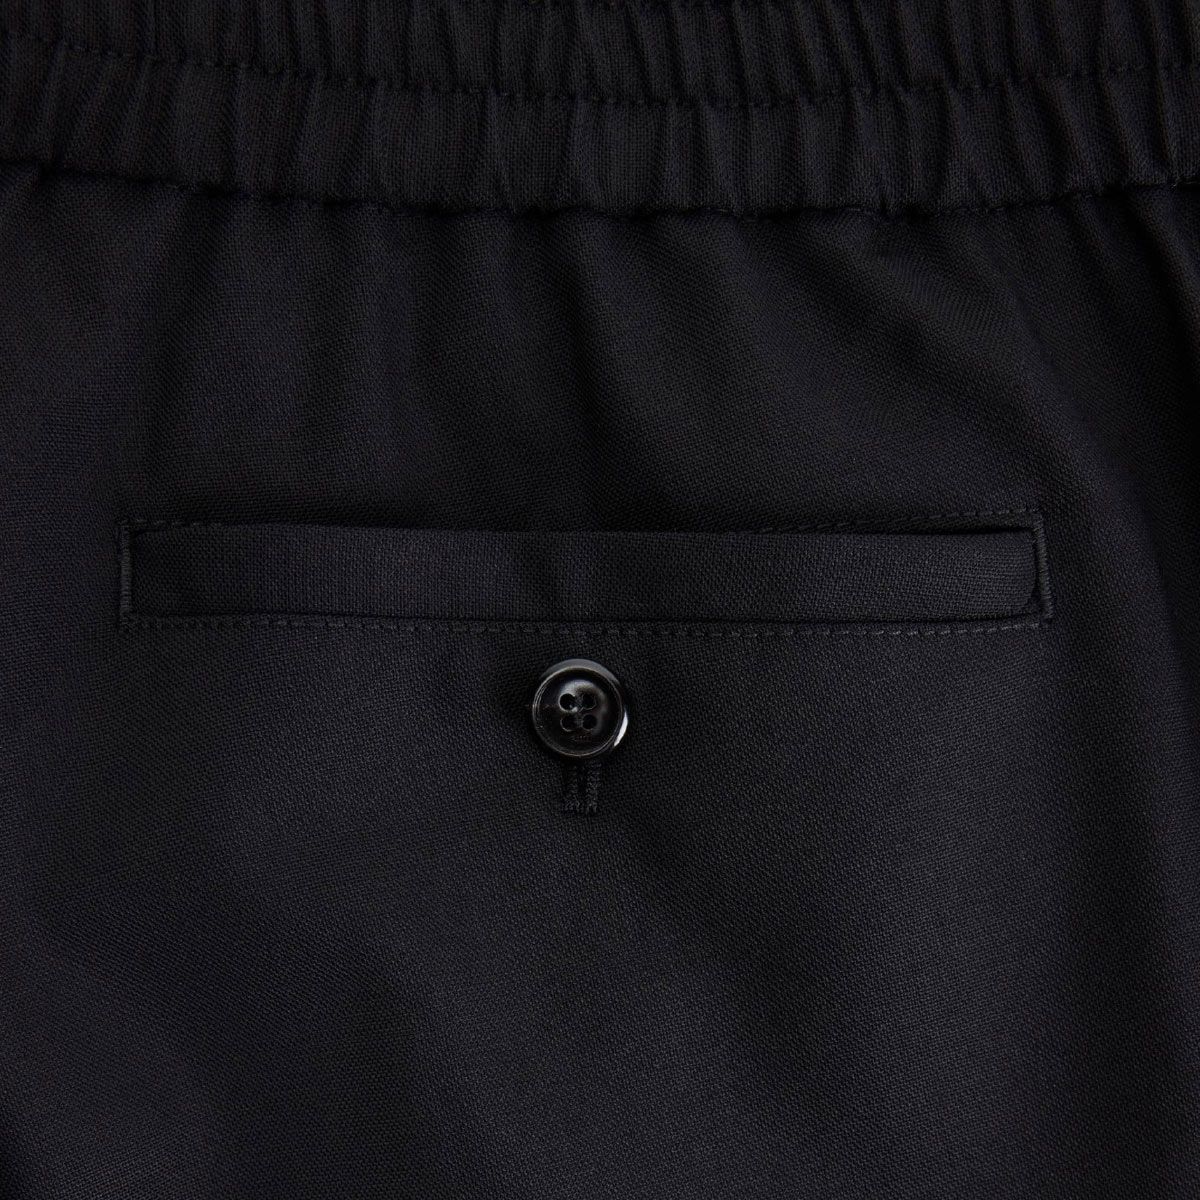 Fit Trousers In Black